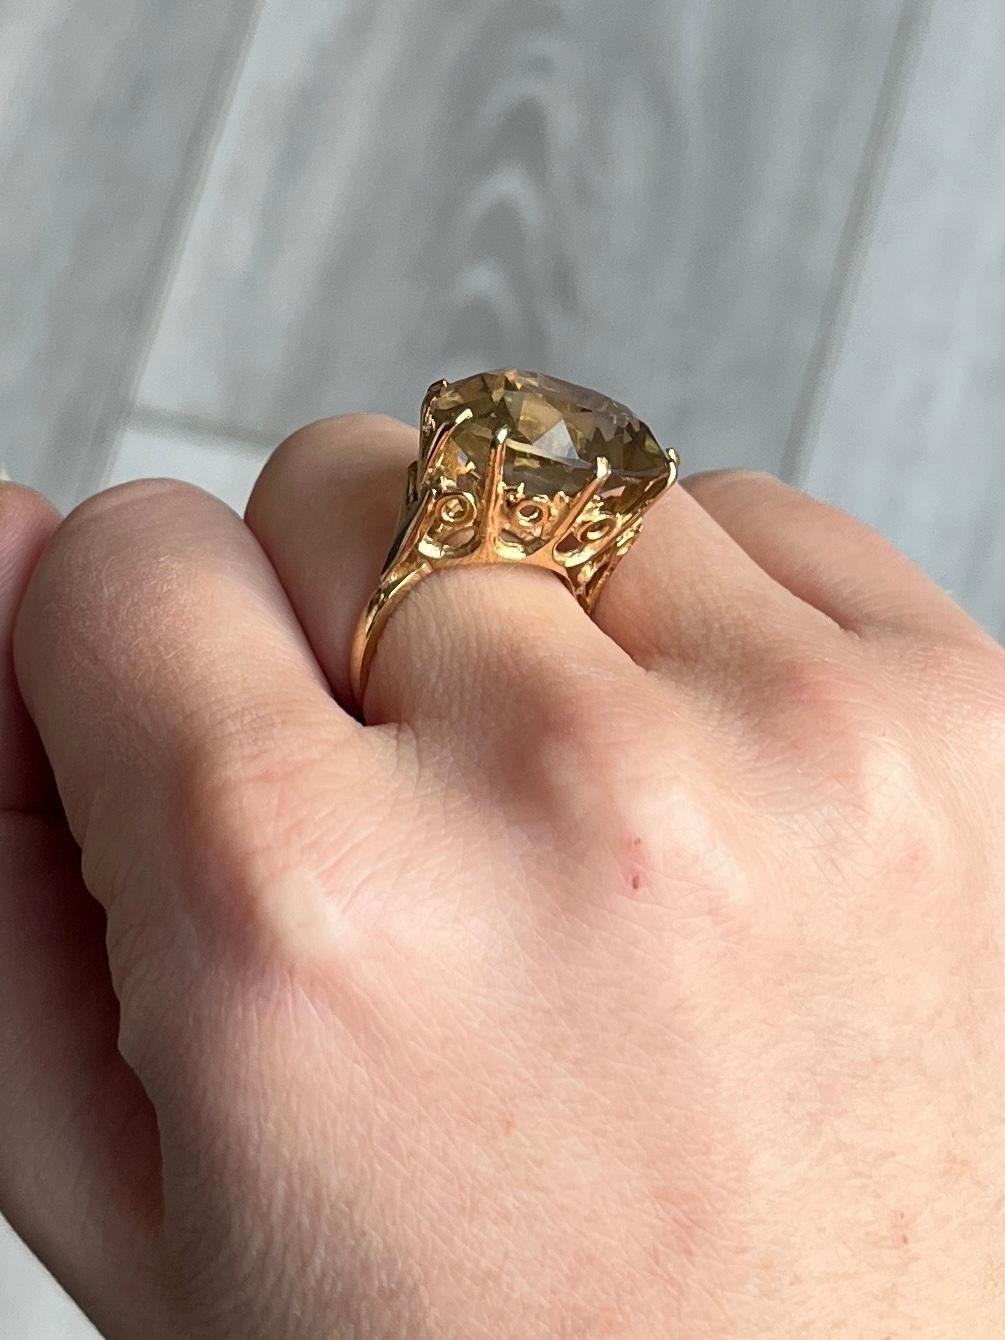 The gorgeous citrine stone in this ring is a deep yellow colour and is set in multiple claws. The gallery holds so much detail and is modelled in 9carat gold. Hallmarked London 1970.

Ring Size: M or 6 1/4 
Stone Dimensions: 19x14mm
Height Off